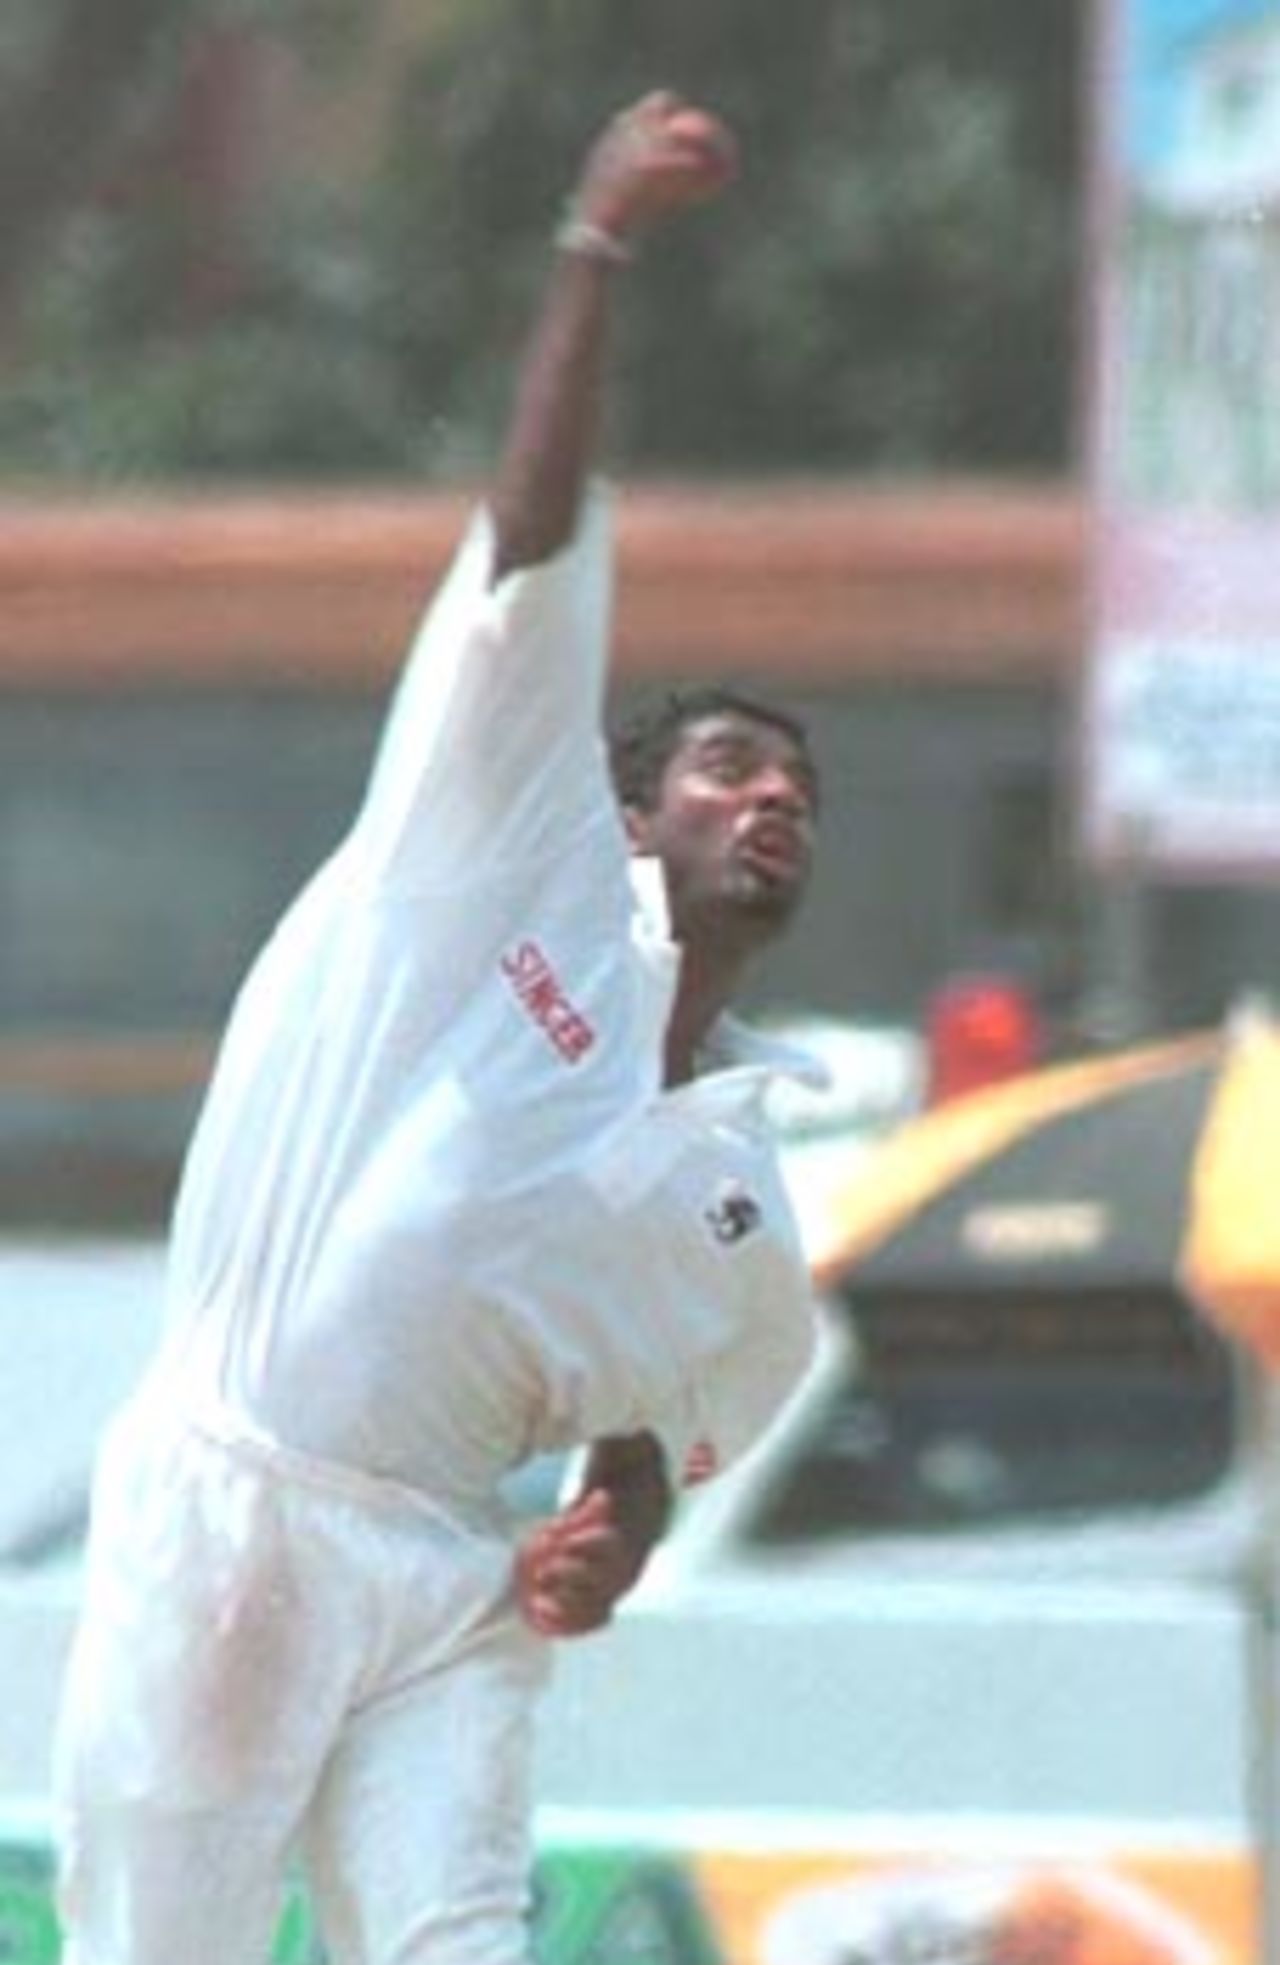 Muthiah Muralitharan about to deliver one of his lethal off spinners, South Africa in Sri Lanka, 2000/01, 1st Test, Sri Lanka v South Africa, Galle International Stadium, 20-24 July 2000 (Day 3).